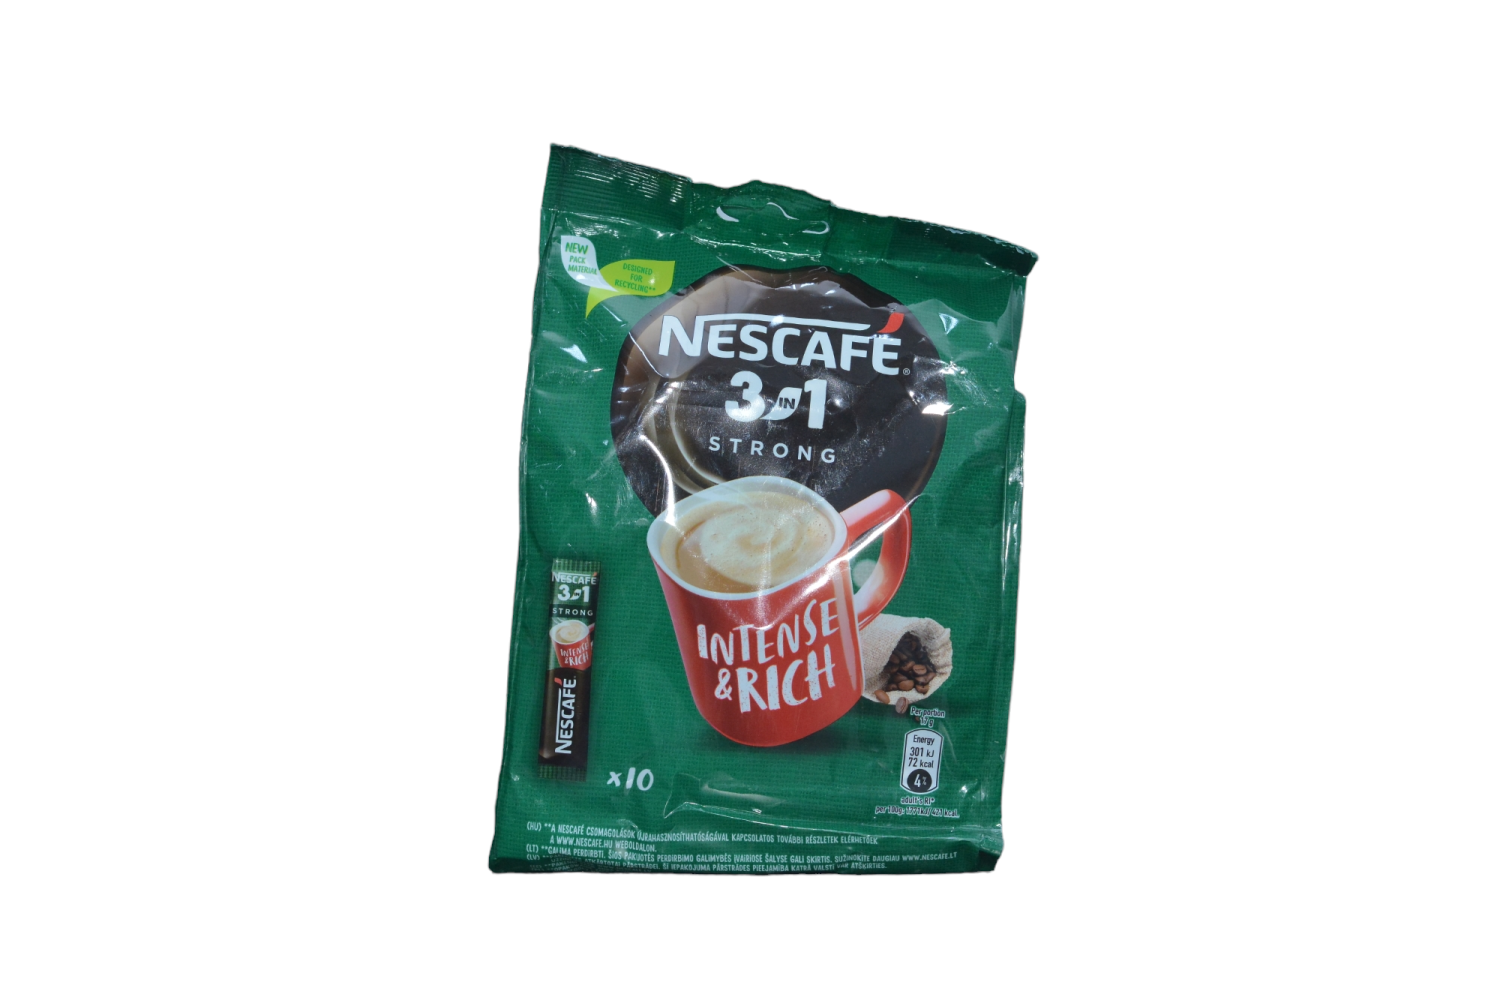 Nescafe 3 in 1 Strong